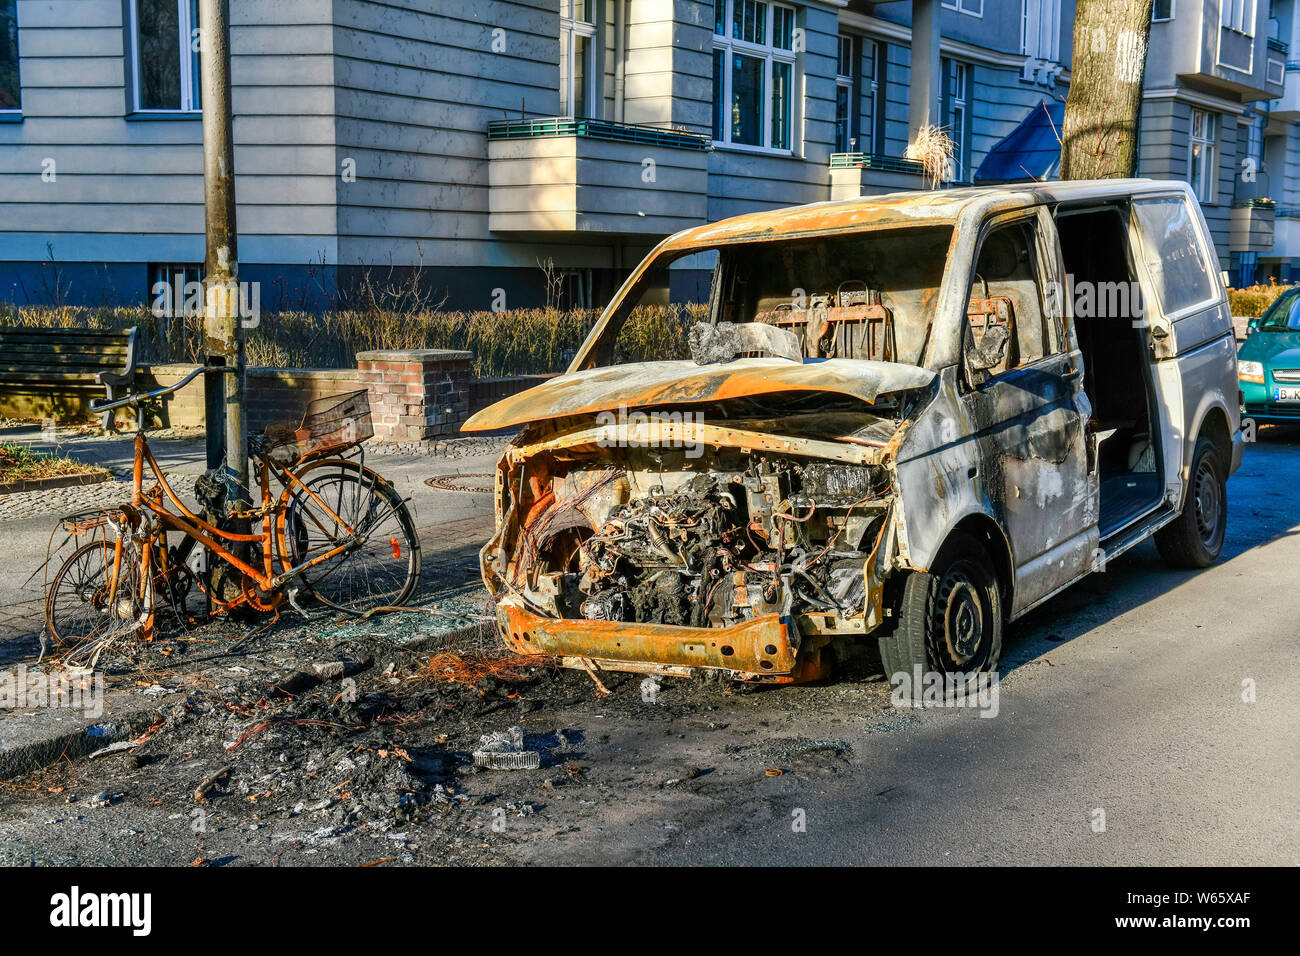 Kleintransporter High Resolution Stock Photography and Images - Alamy